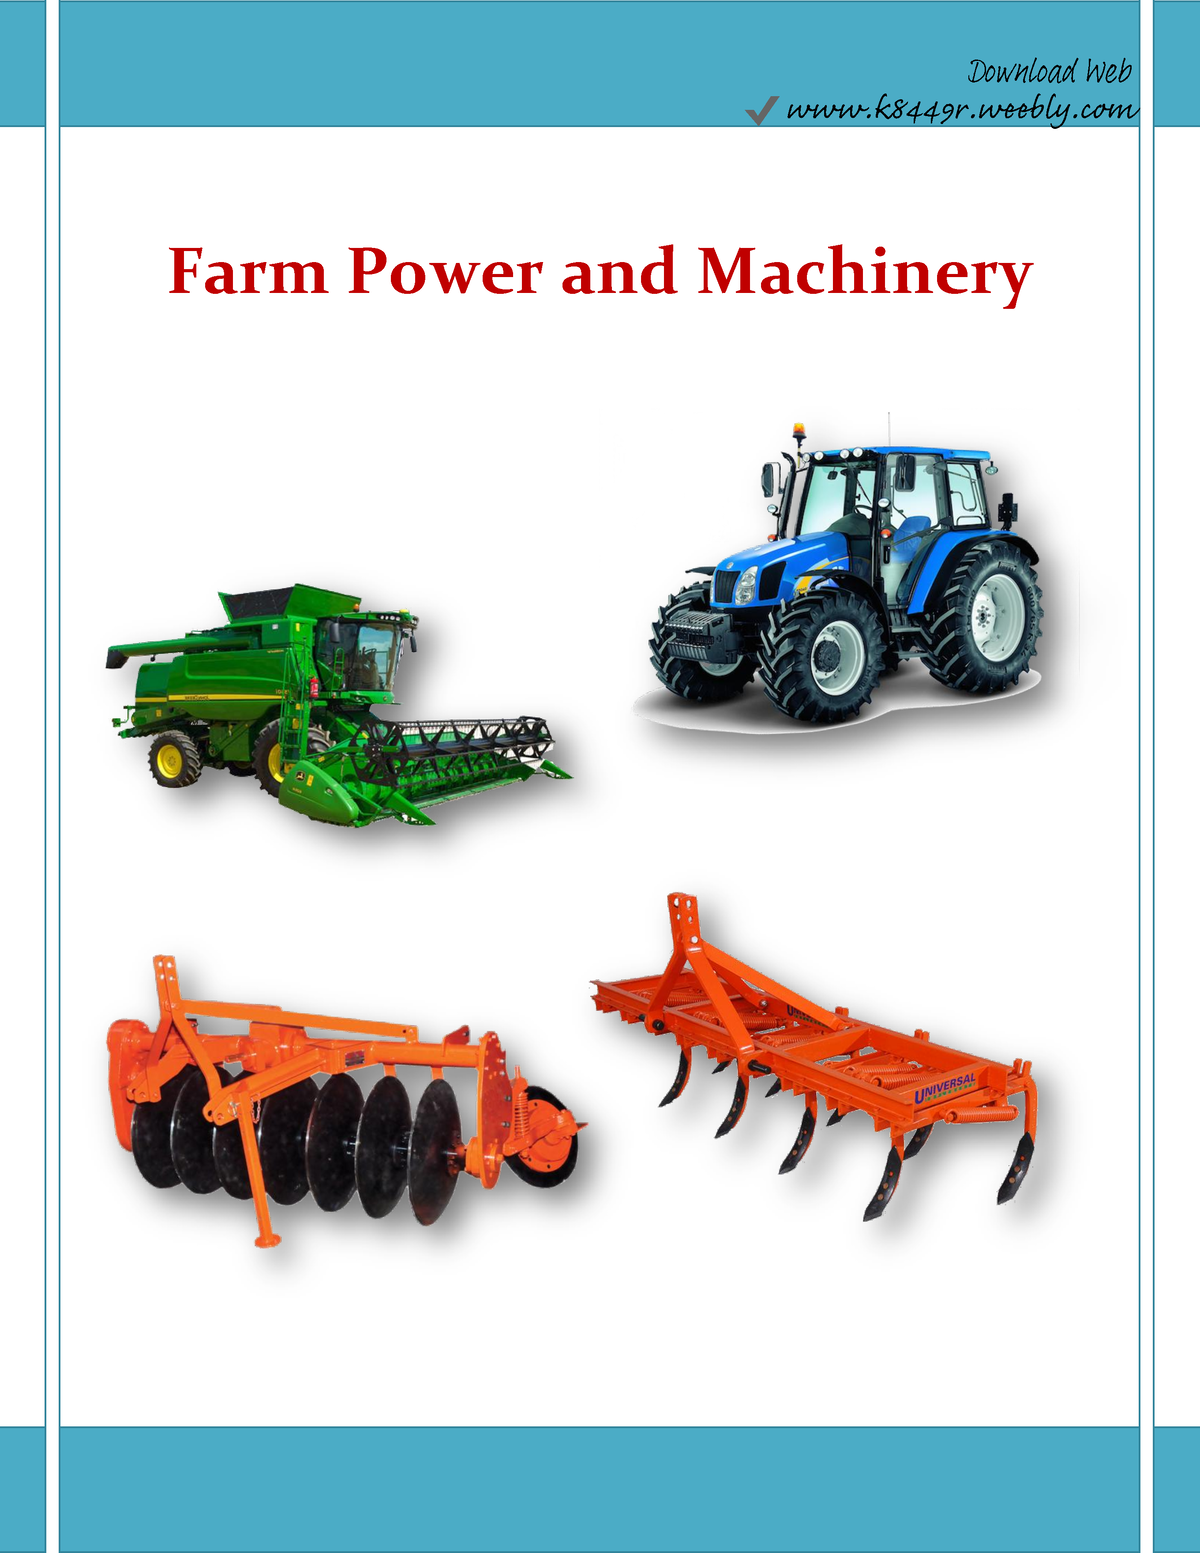 Farm power and machinery signed - Farm Power and Machinery k8449r ...